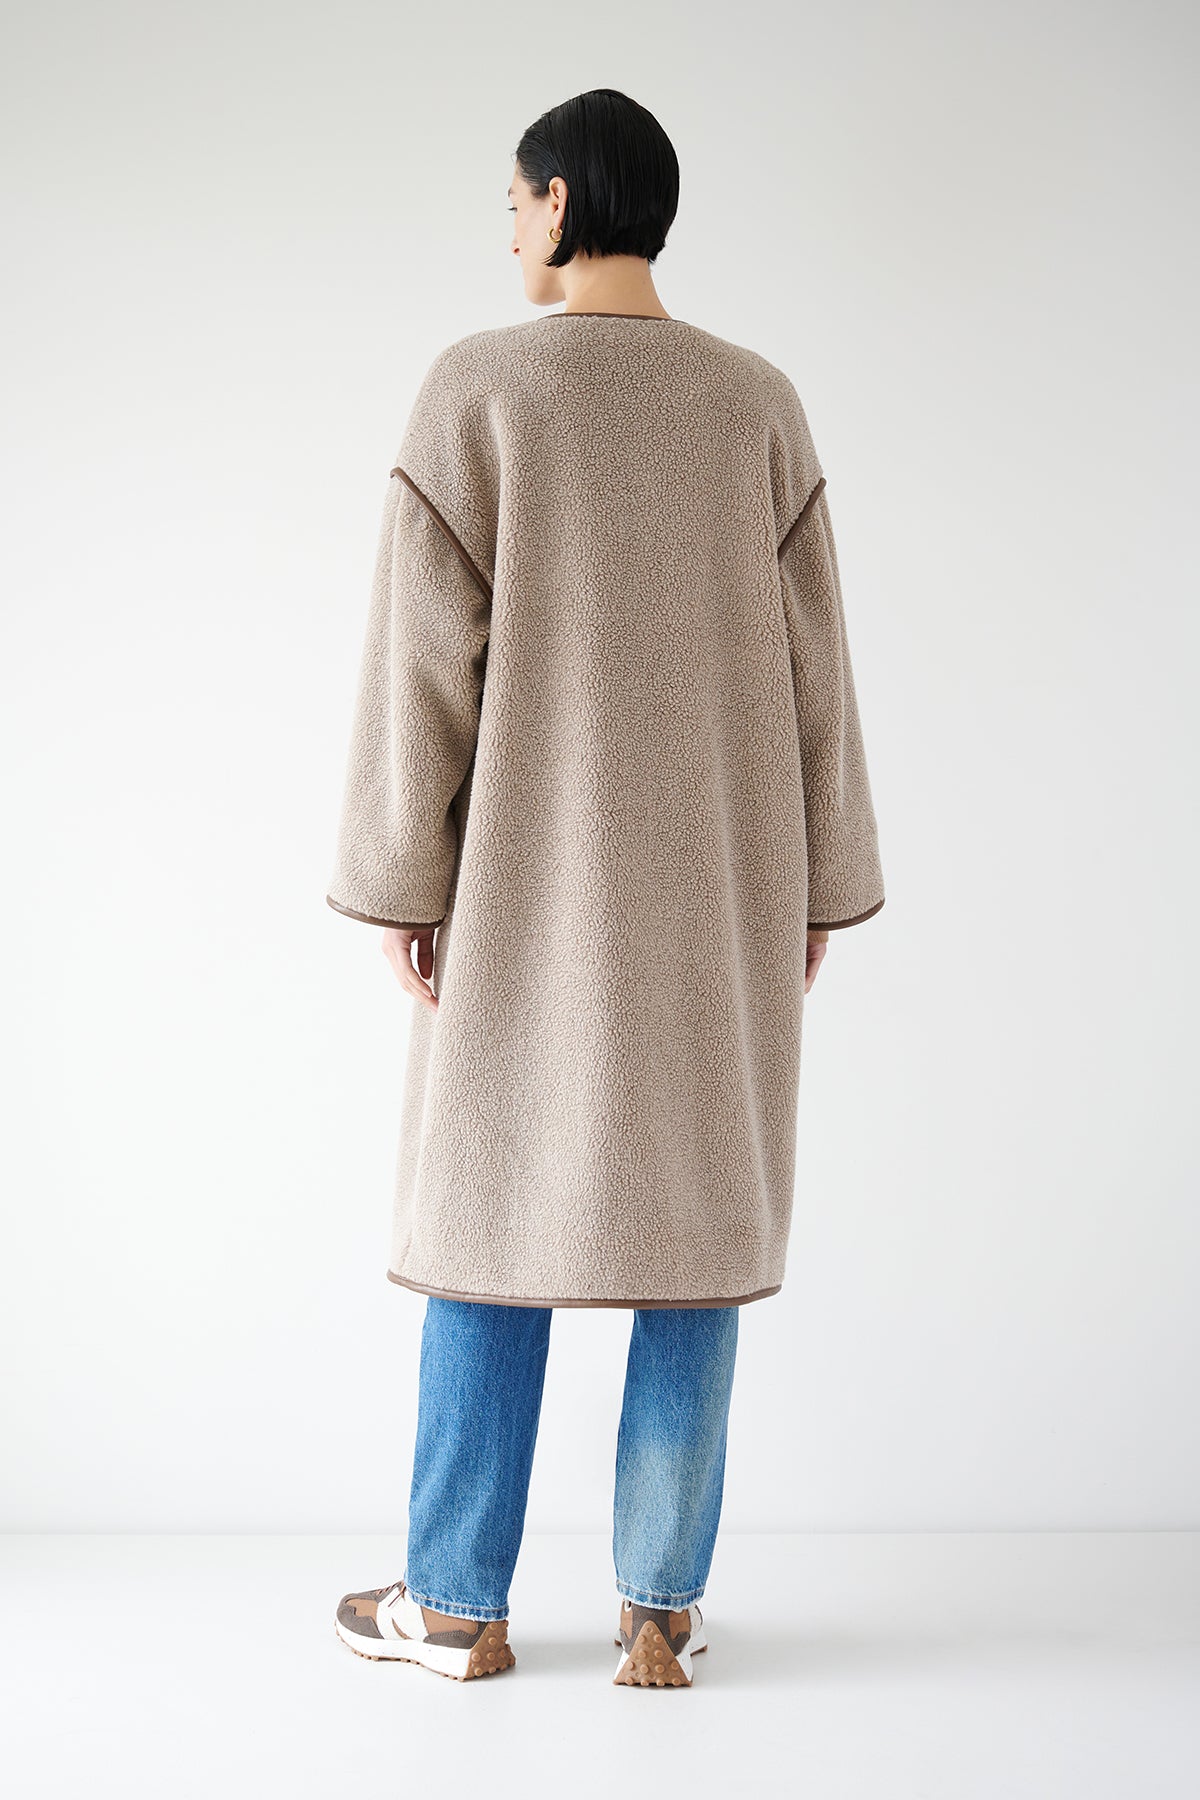 The back view of a woman wearing a Velvet by Jenny Graham Greenwich coat with faux leather trims.-35547408466113